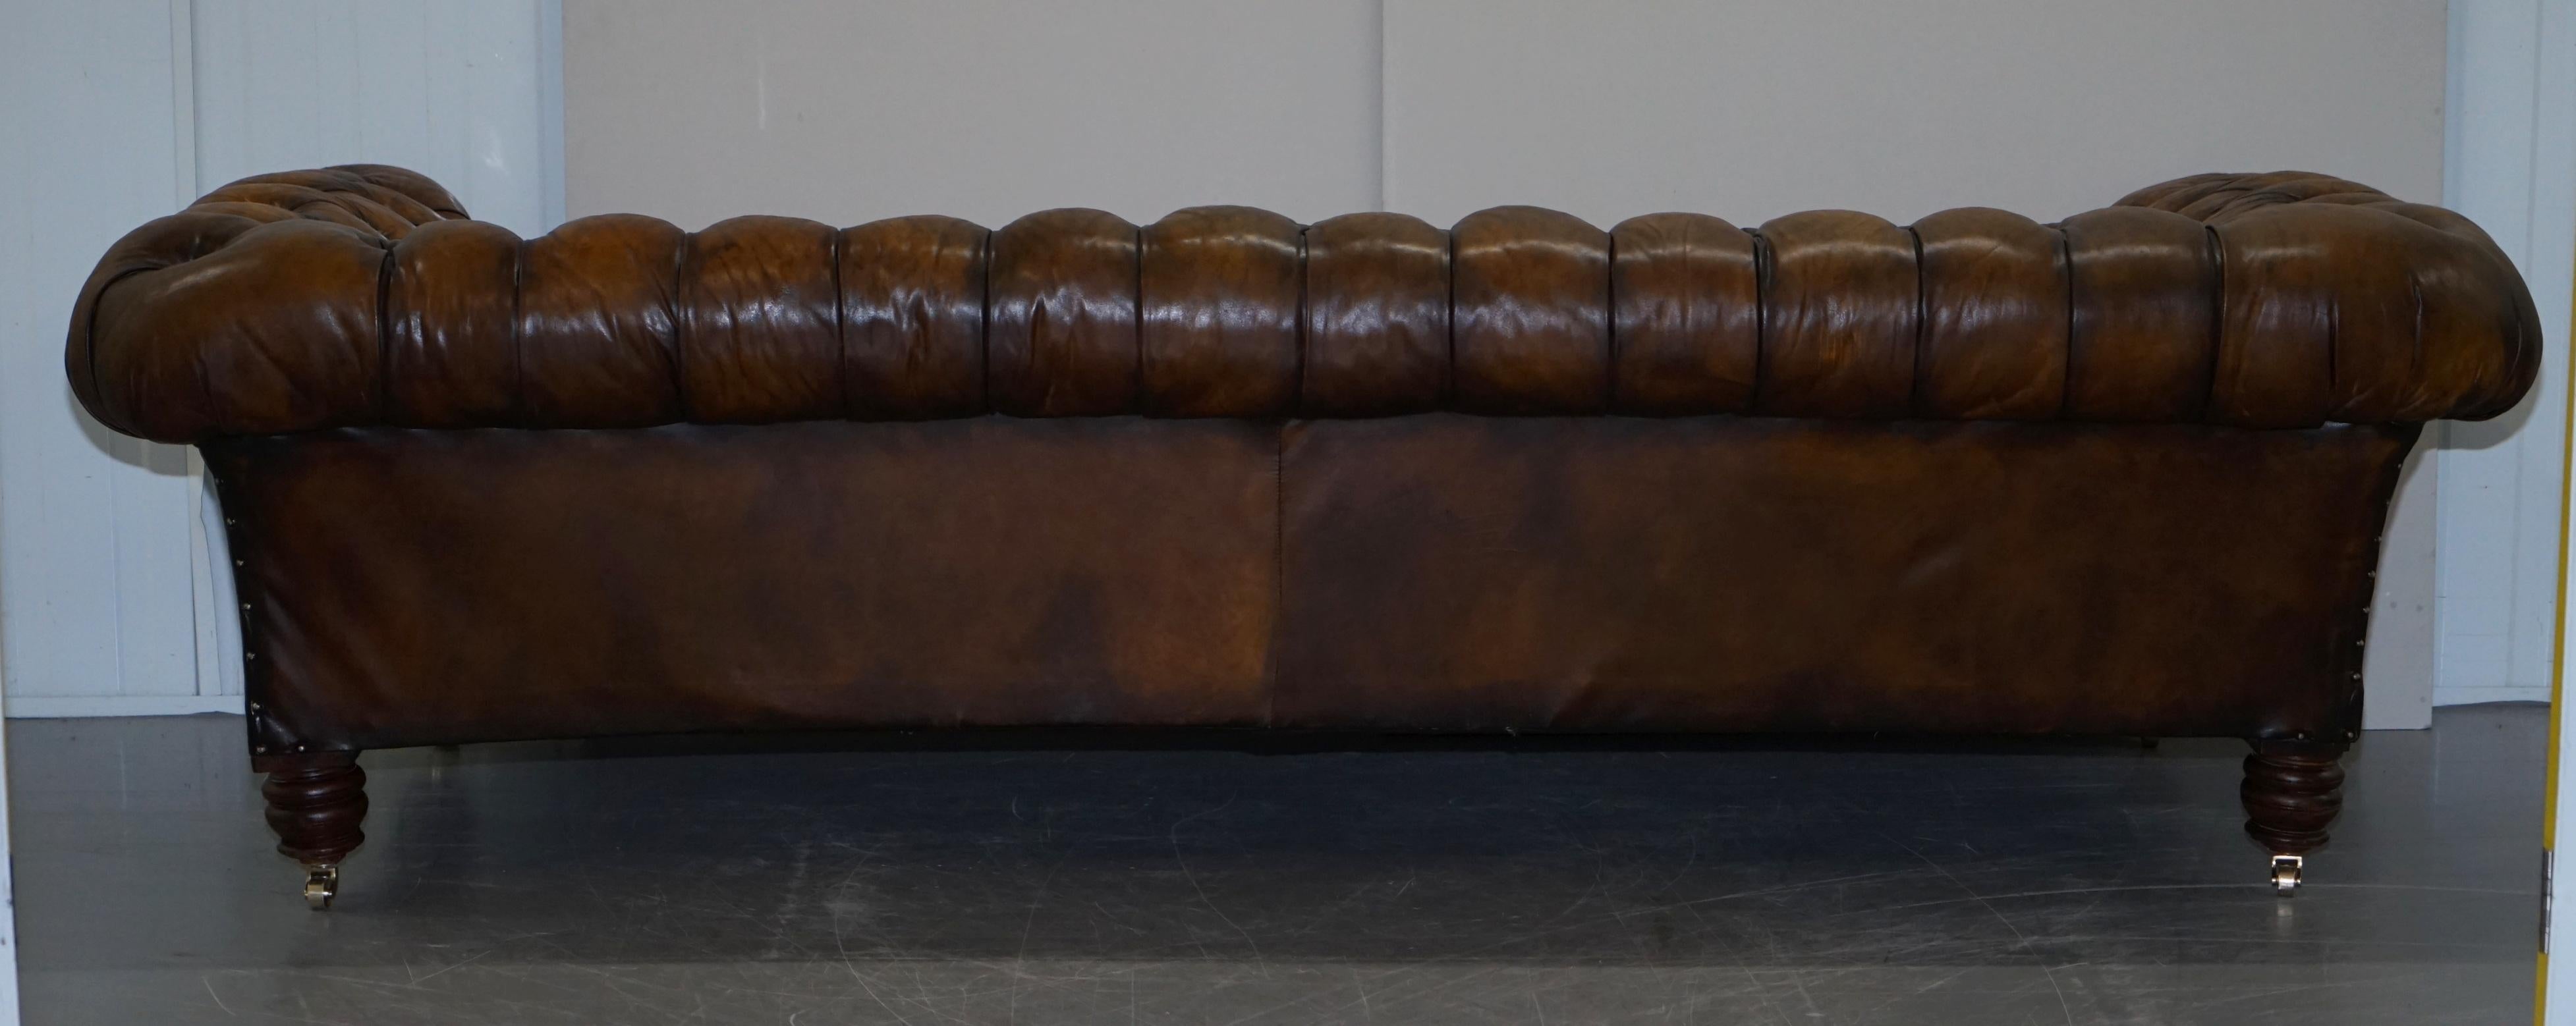 Huge Restored Victorian Chesterfield Brown Leather Sofa Horse Hair Coil Sprung 11